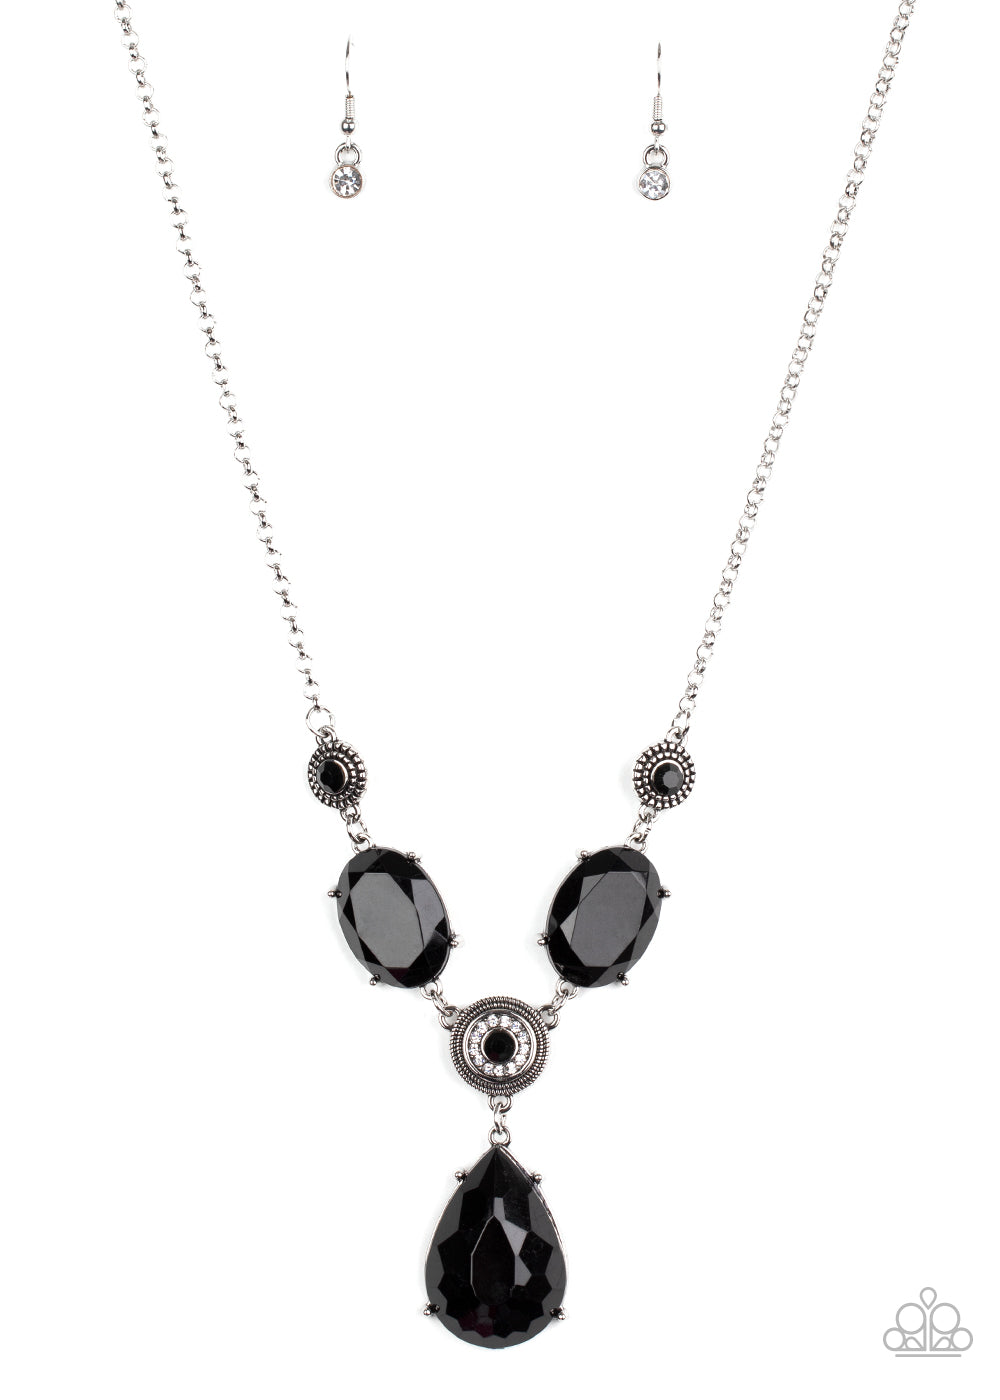 HEIRLOOM HIDEAWAY - BLACK ACRYLIC FACETED BEADS NECKLACE